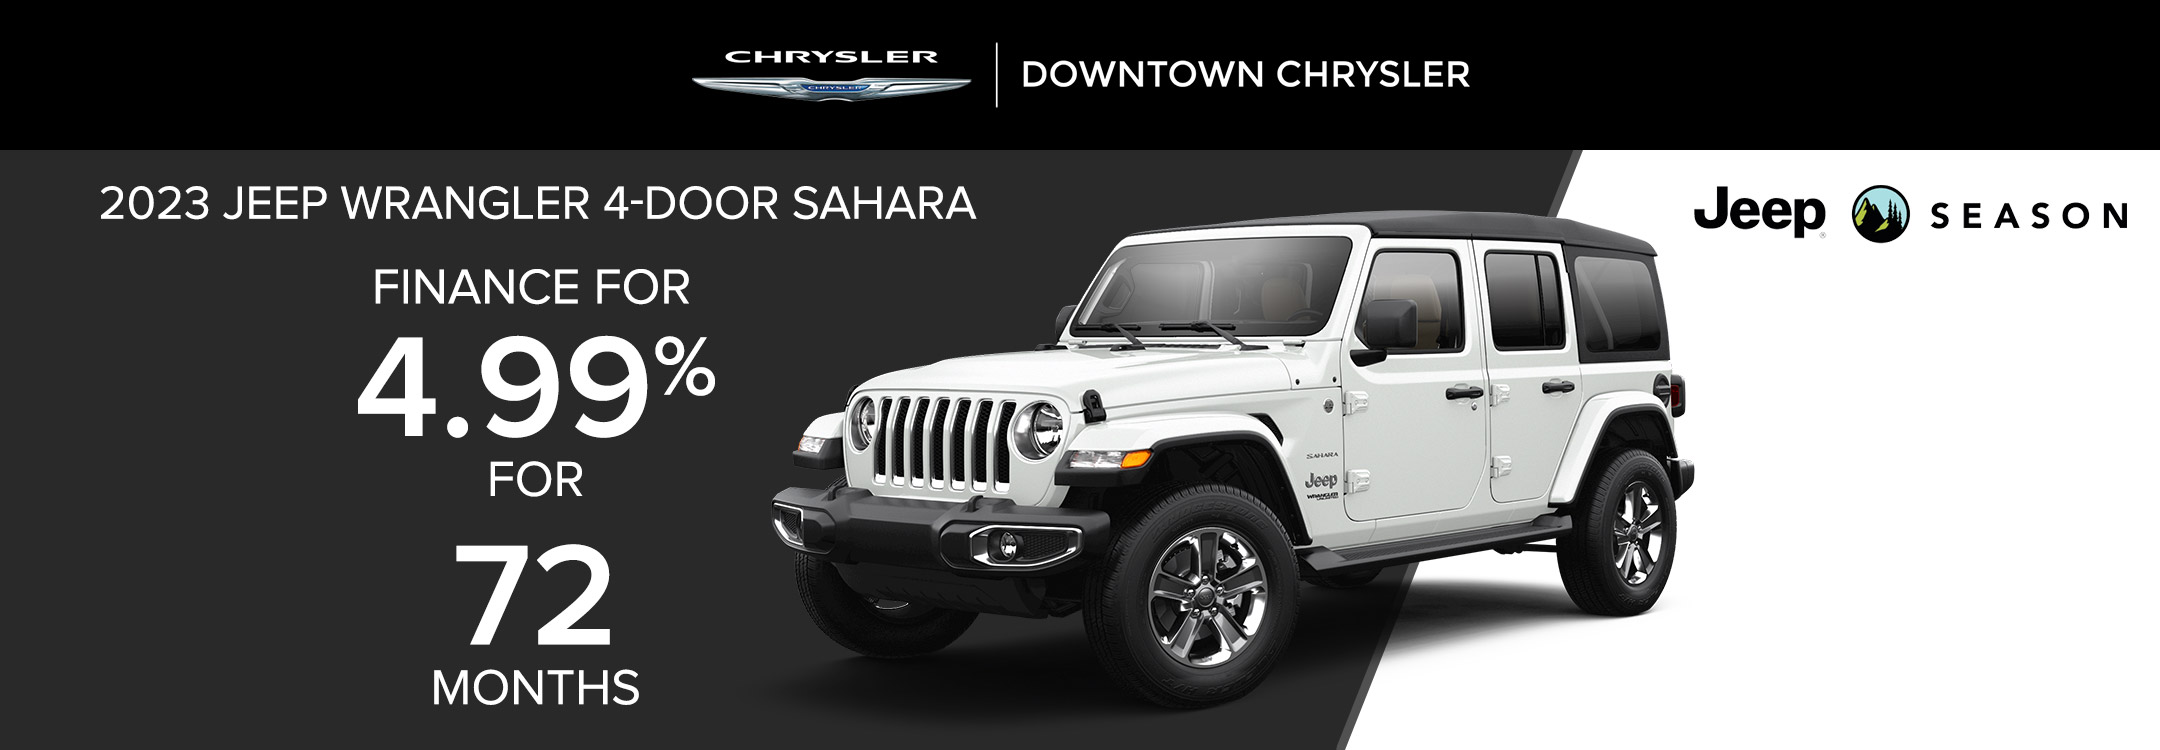 Jeep Season | Special Offers at Downtown Chrysler in Toronto, ON